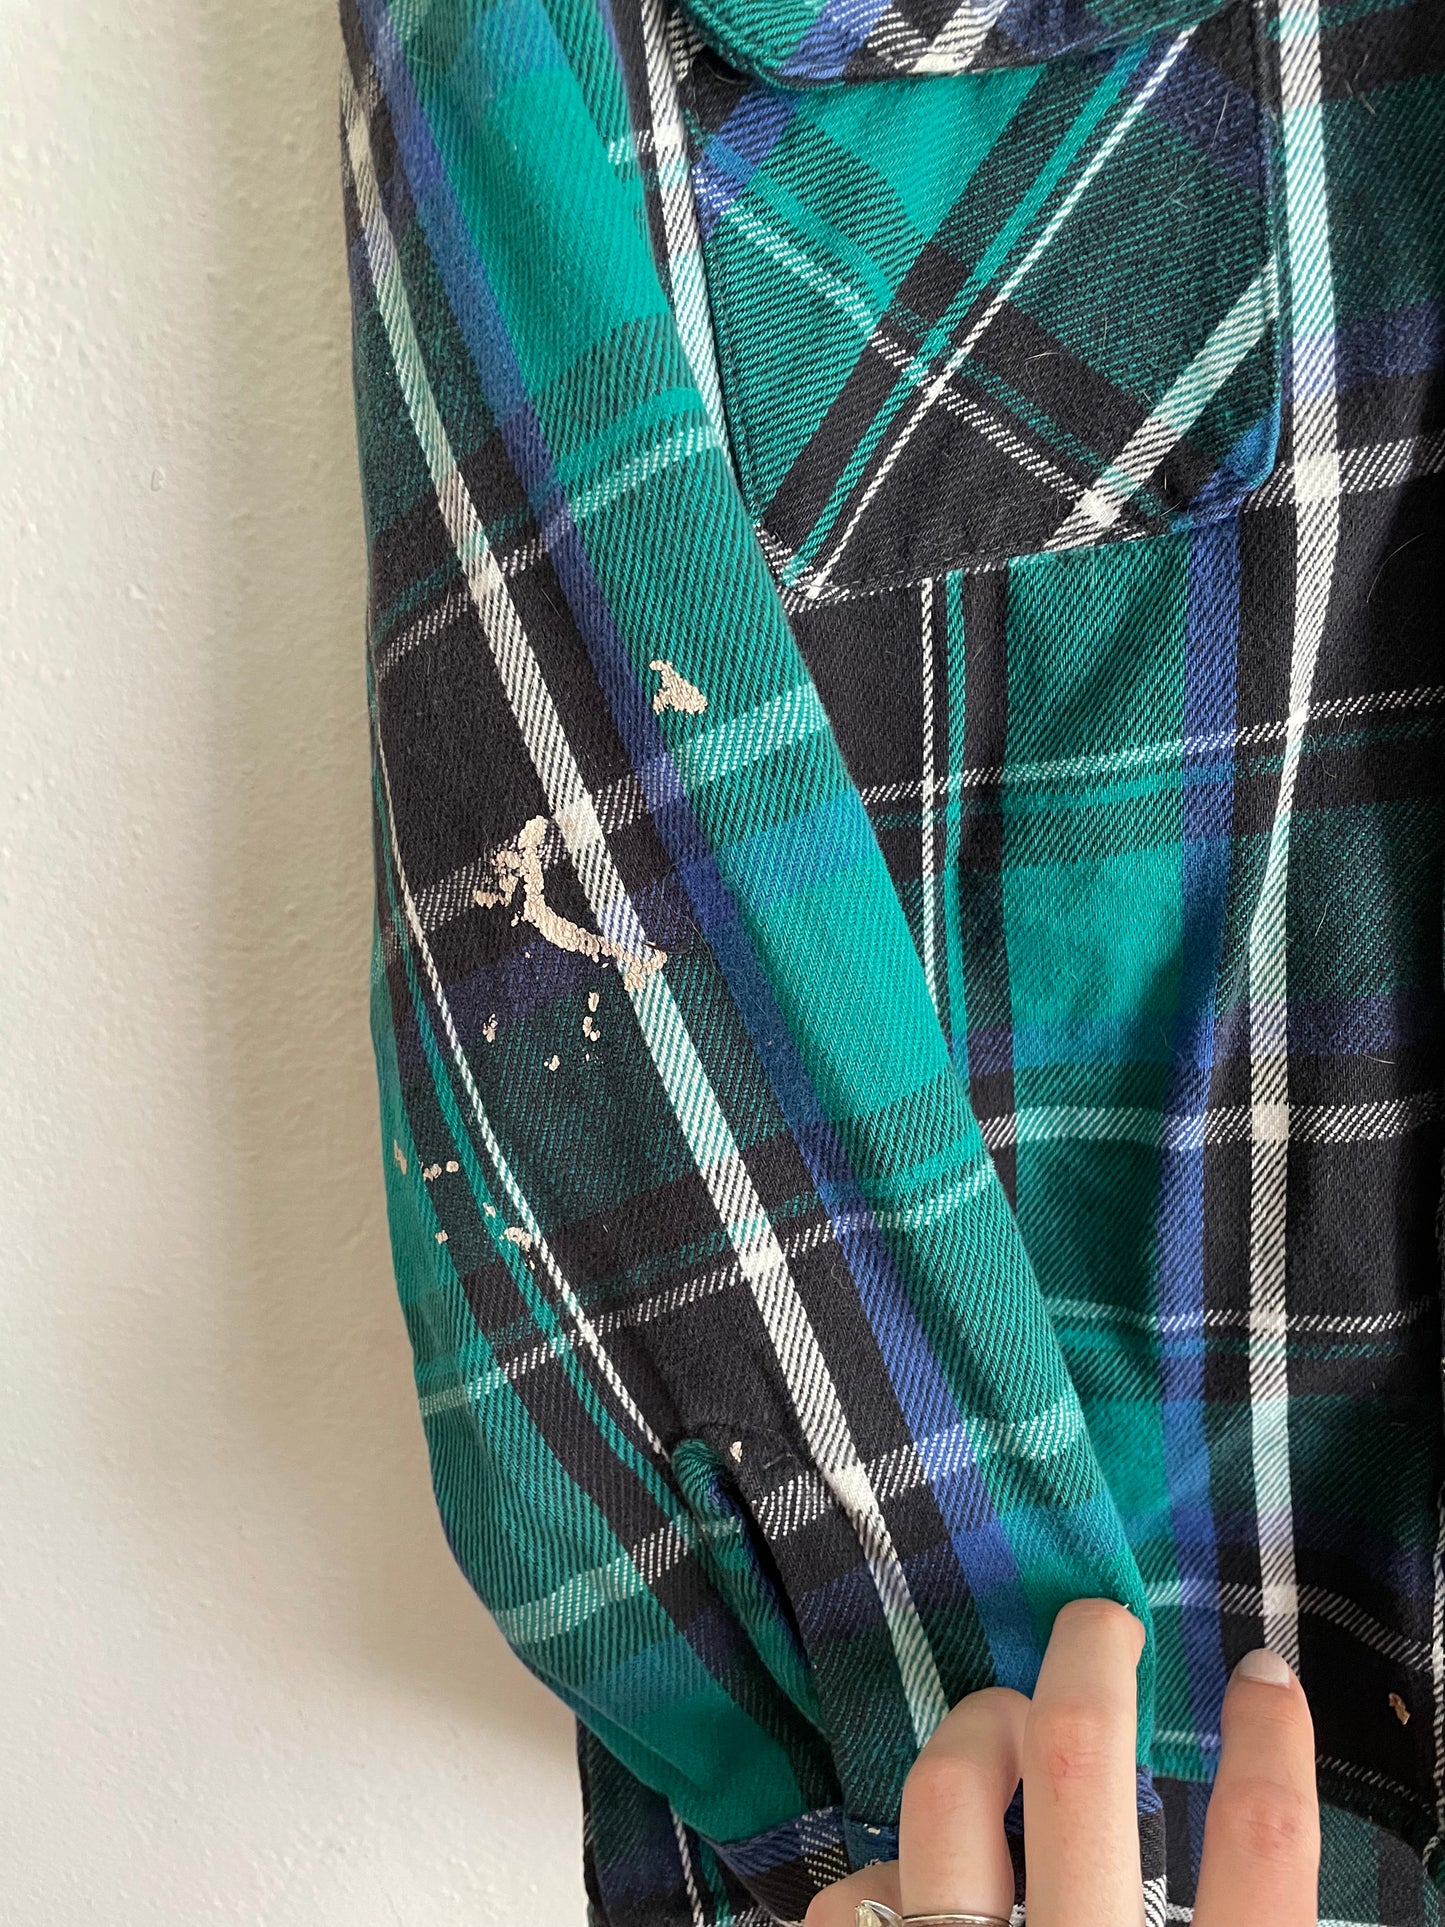 Five Brothers Flannel (M)